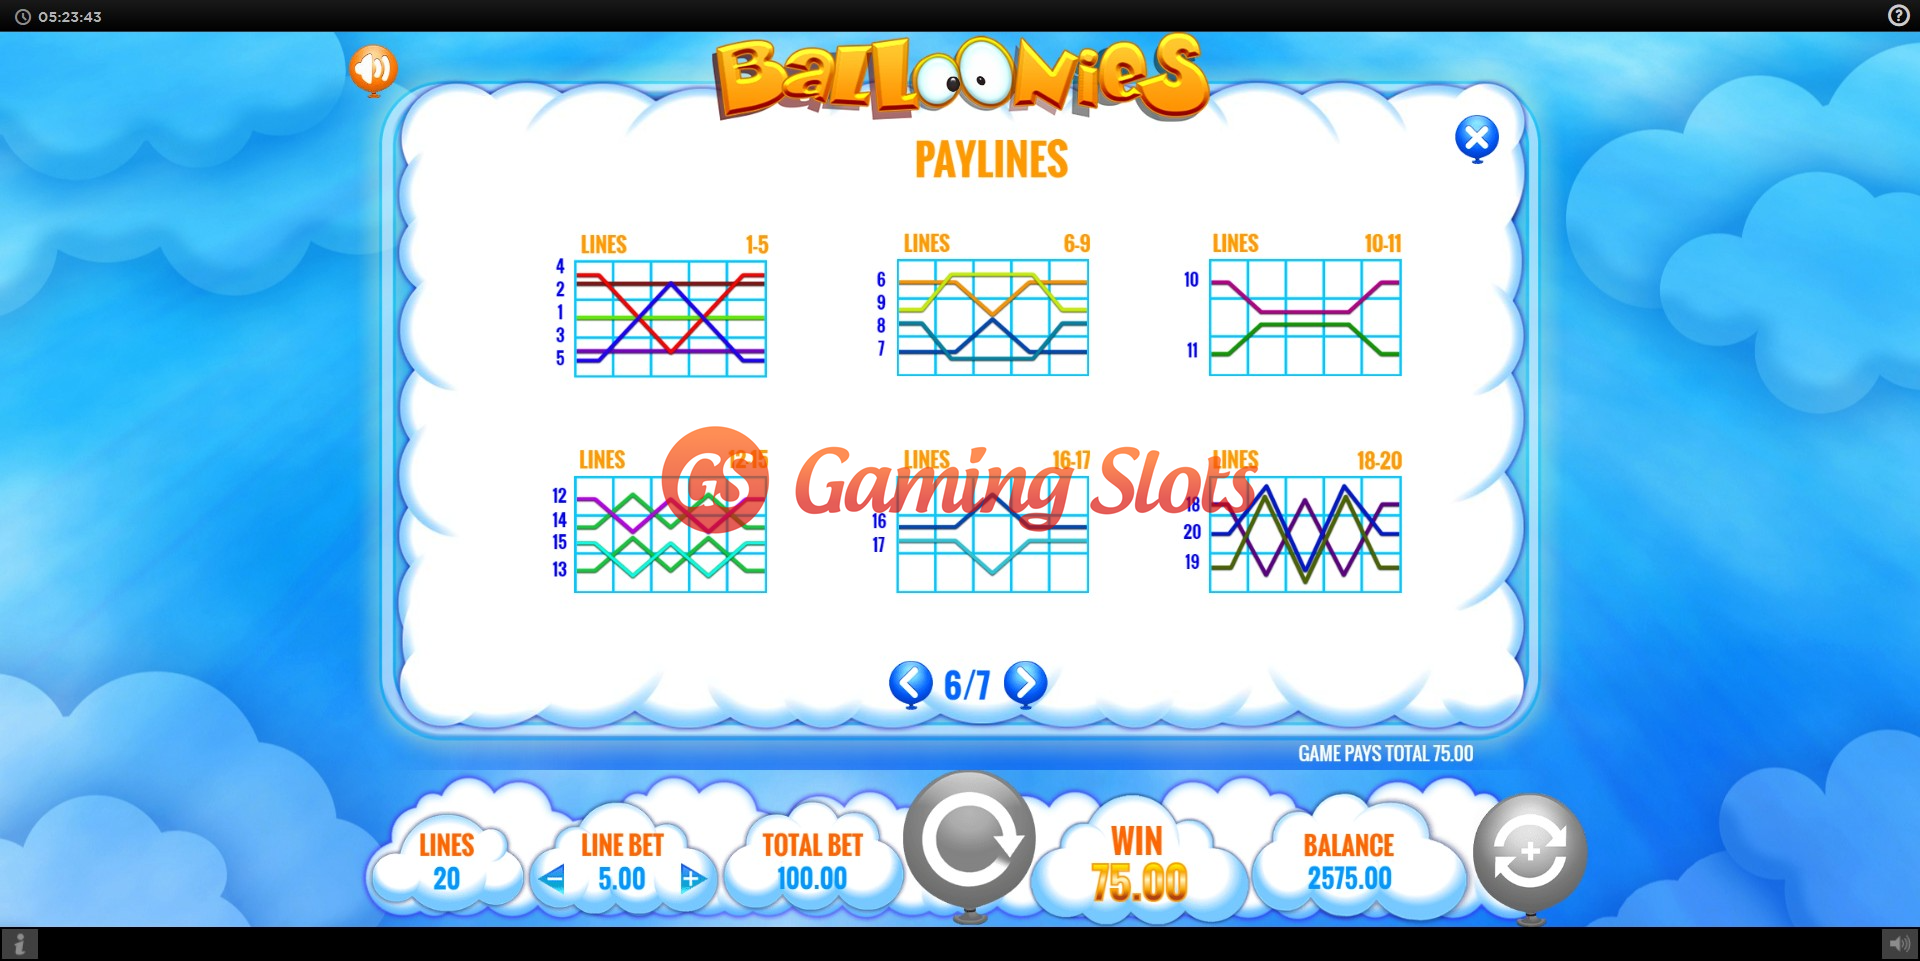 Pay Table for Balloonies slot from IGT